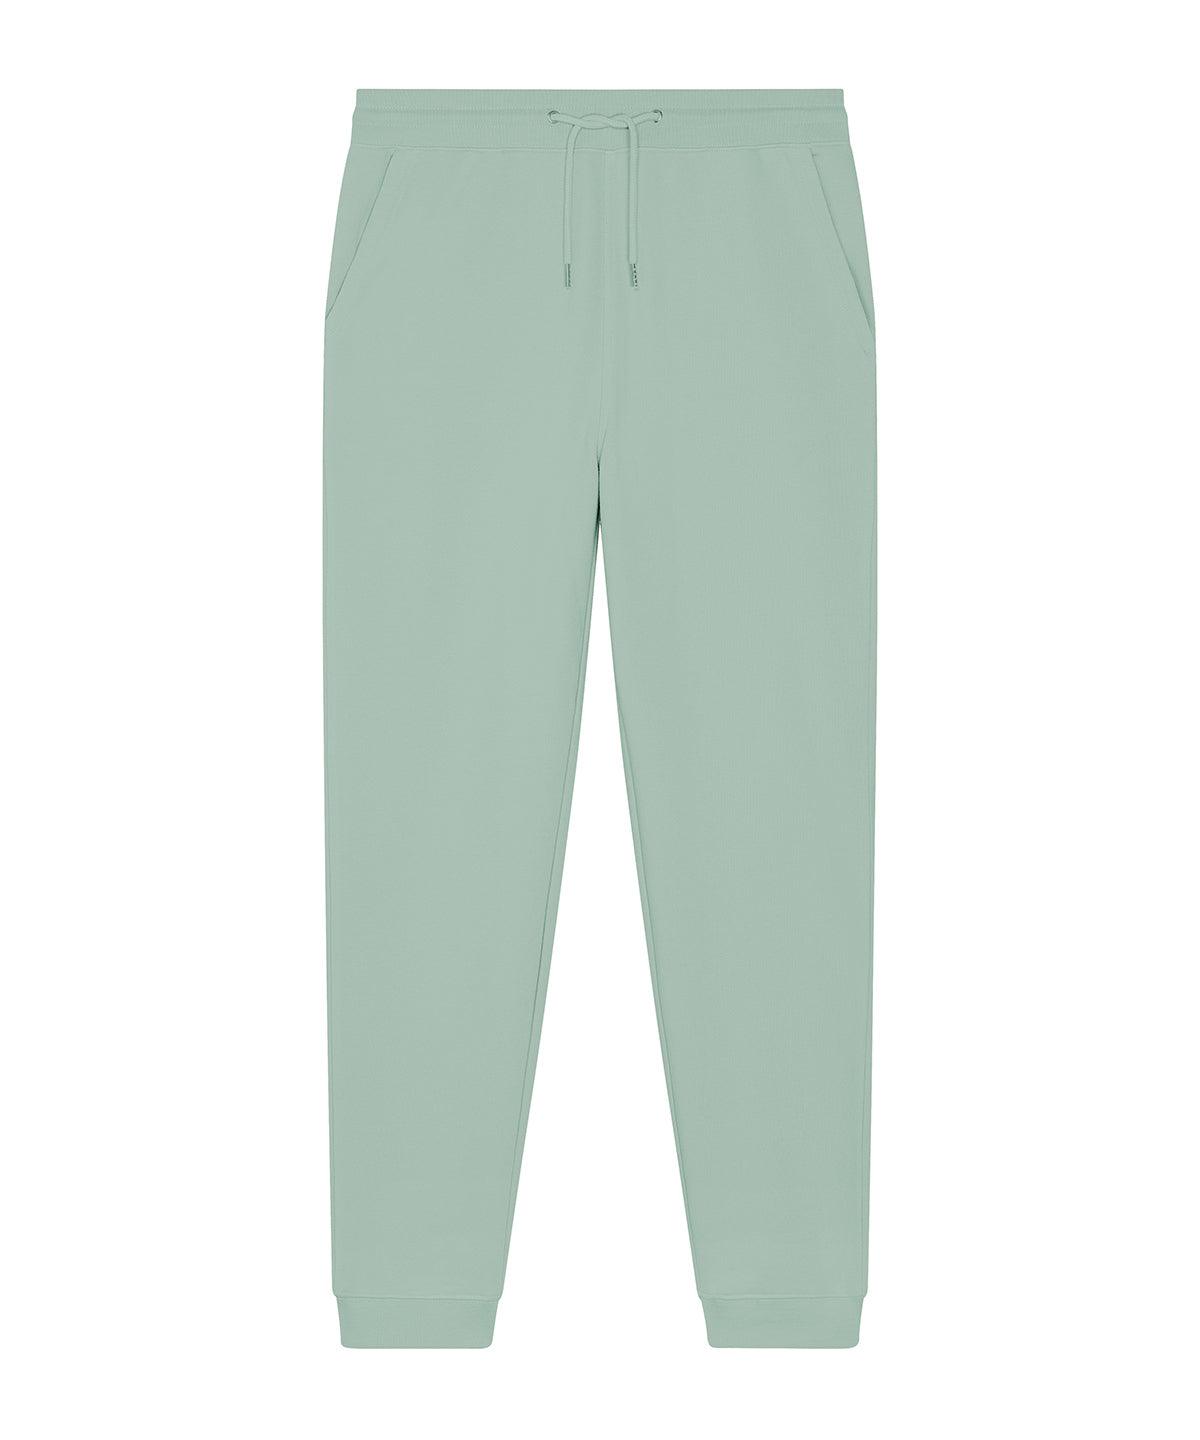 Aloe - Stanley Mover jogger pants (STBM569) Sweatpants Stanley/Stella Directory, Exclusives, Joggers, Must Haves, New Colours for 2021, New Products – February Launch, Organic & Conscious, Recycled, Stanley/ Stella Schoolwear Centres